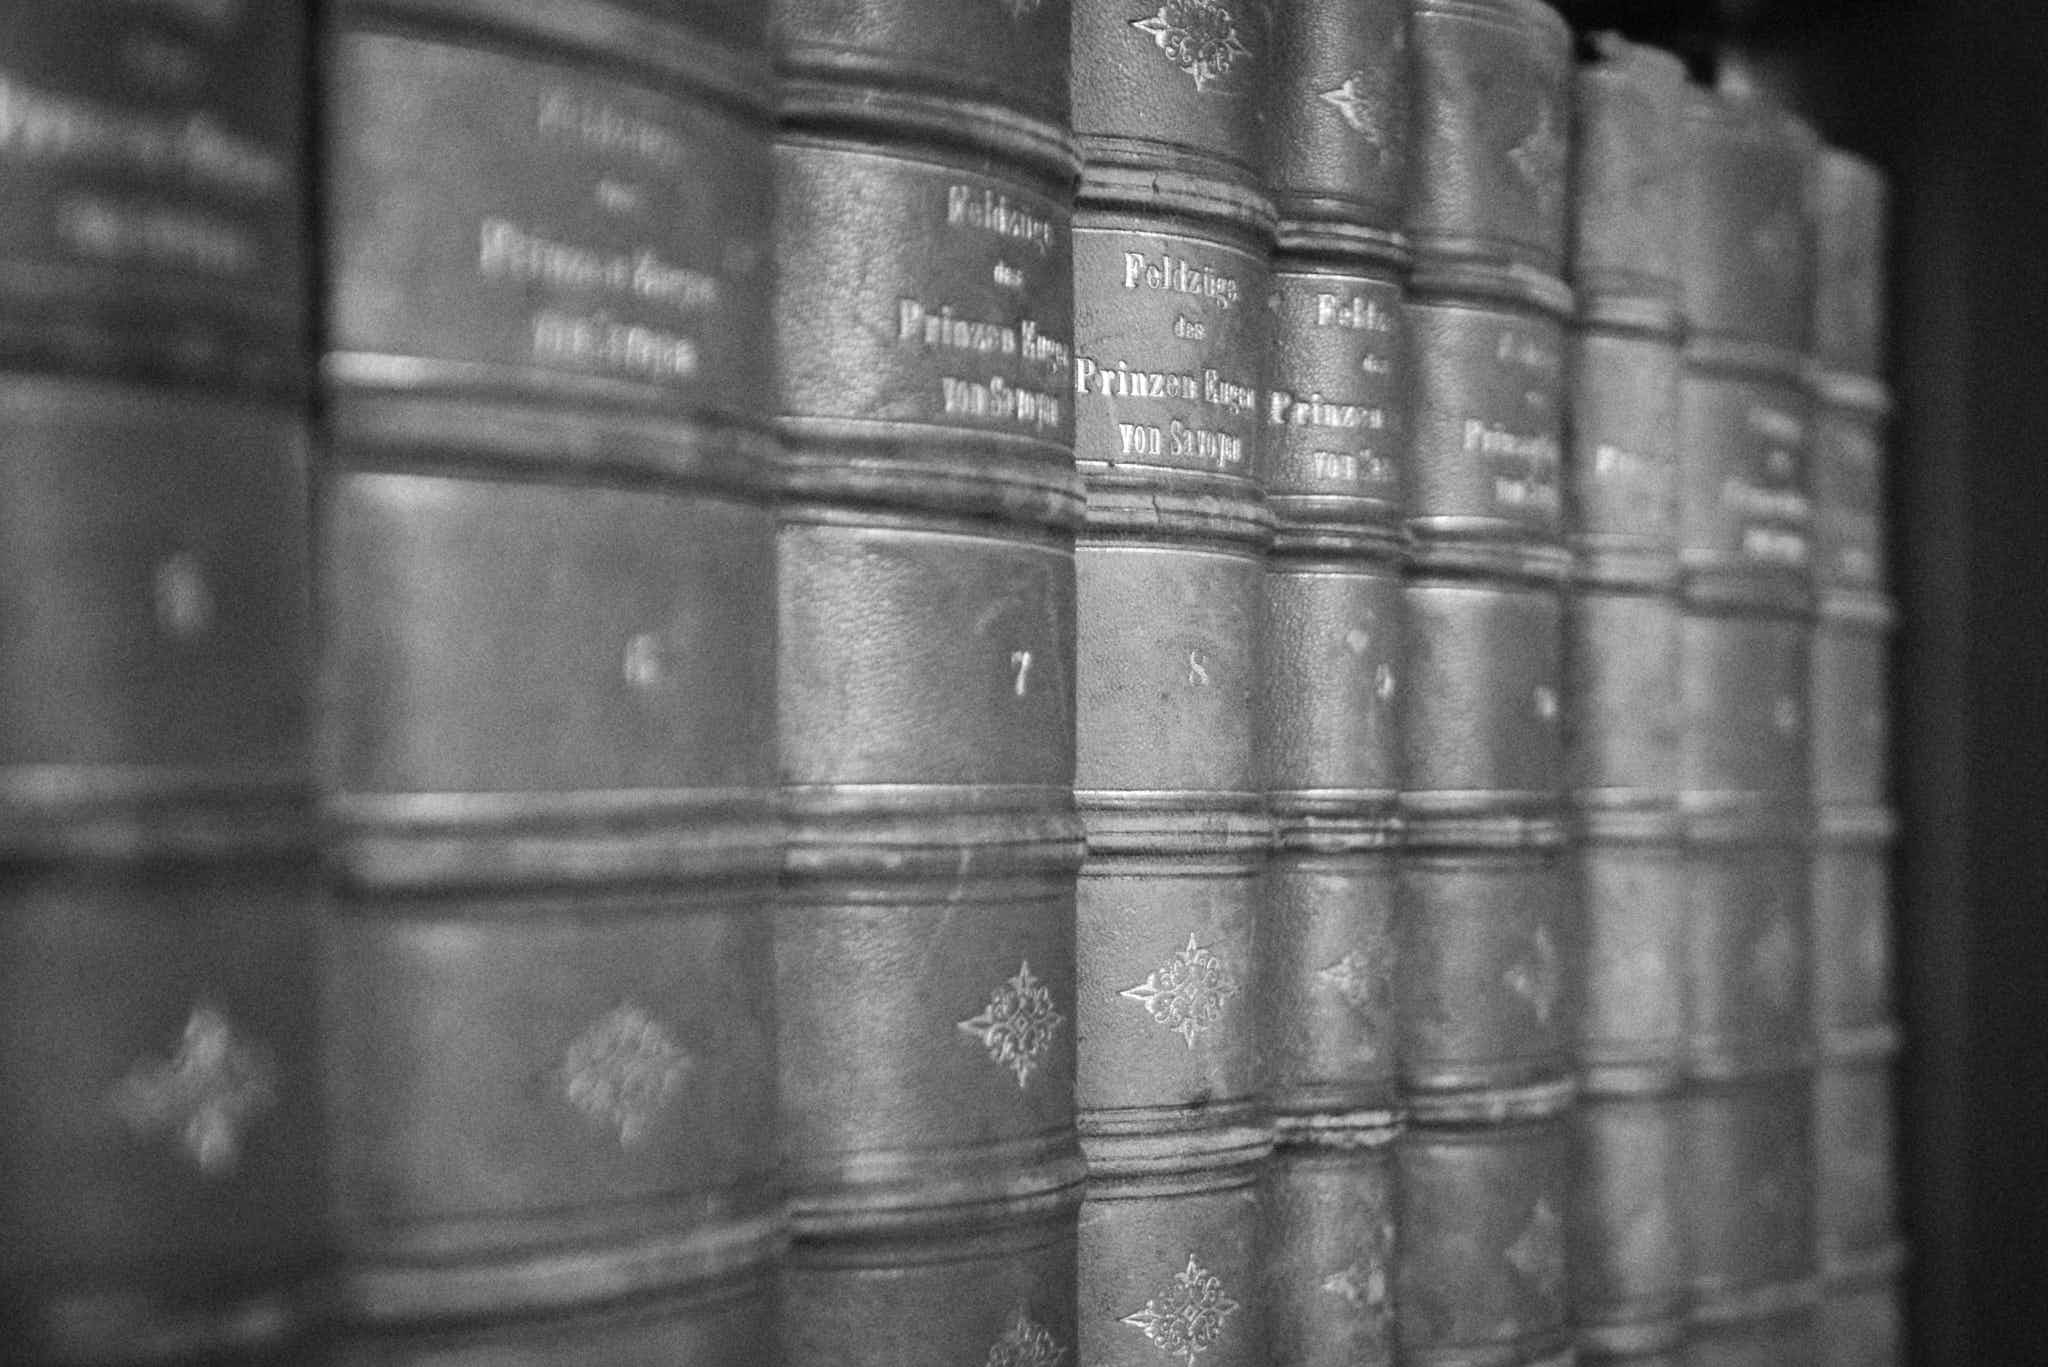 Still life #240331.1. A black and white photograph of old books on a shelf.